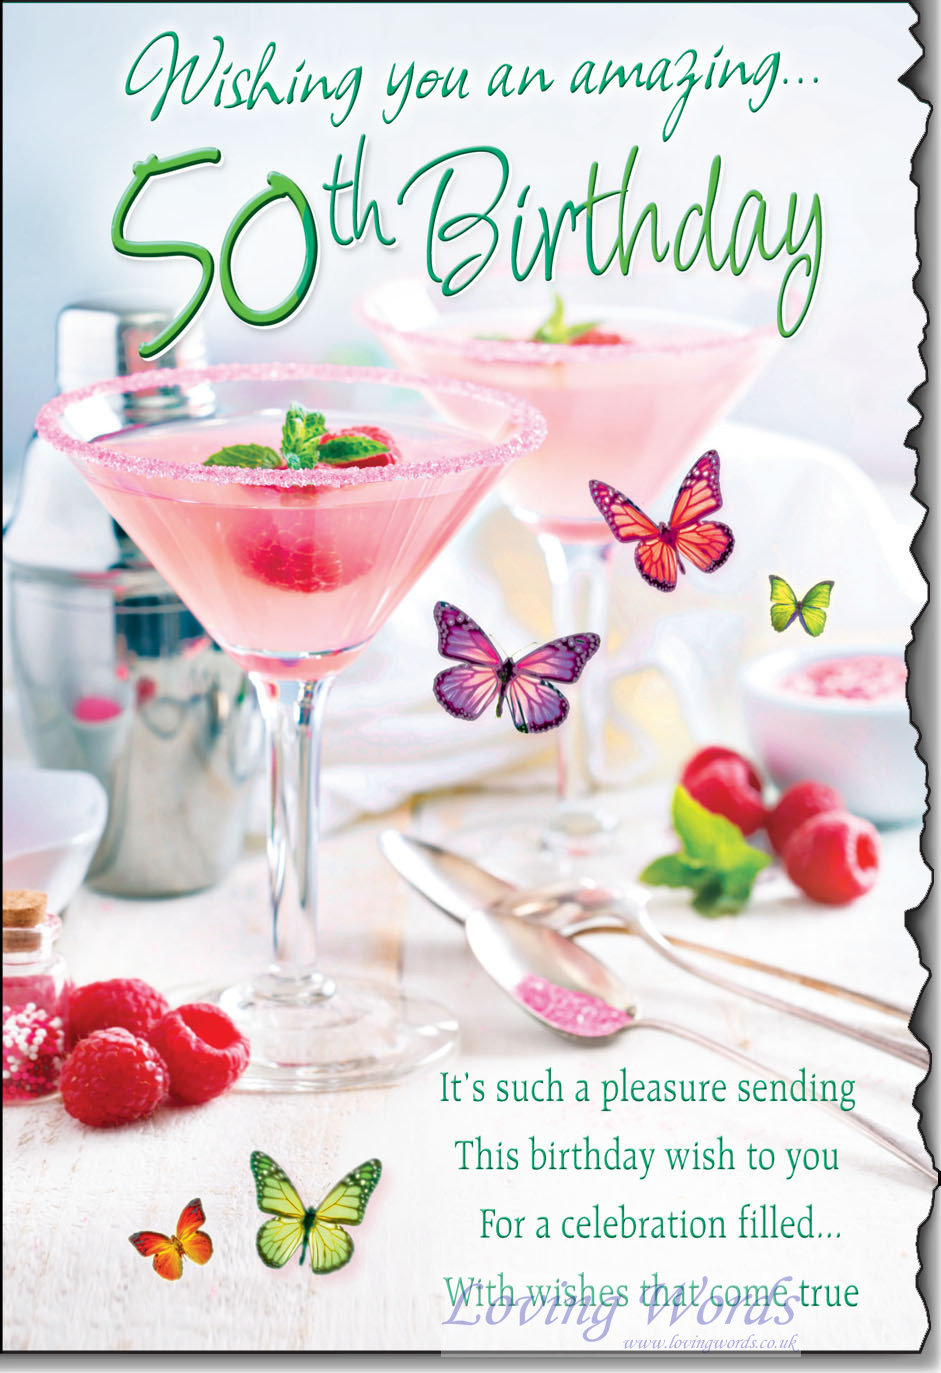 50 Beautiful Happy Birthday Greetings Card Design Examples Part 2 - Photos